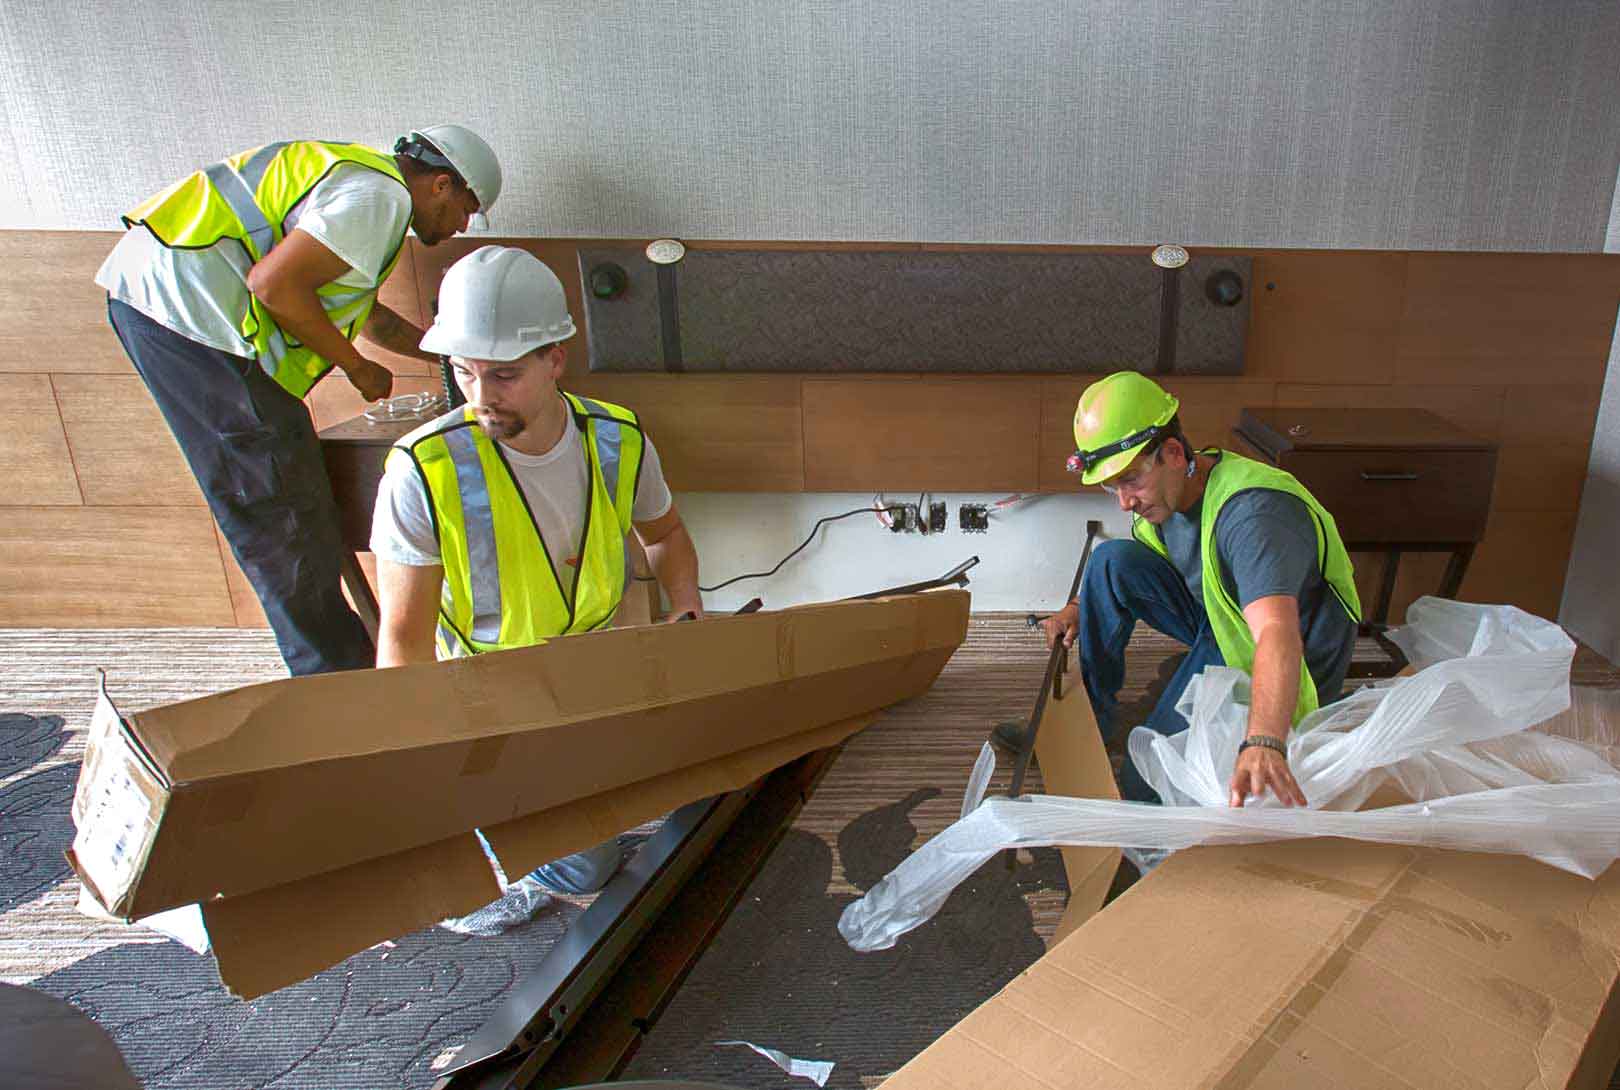 Workers Assembling Furniture In A Newly Built Hotel Room